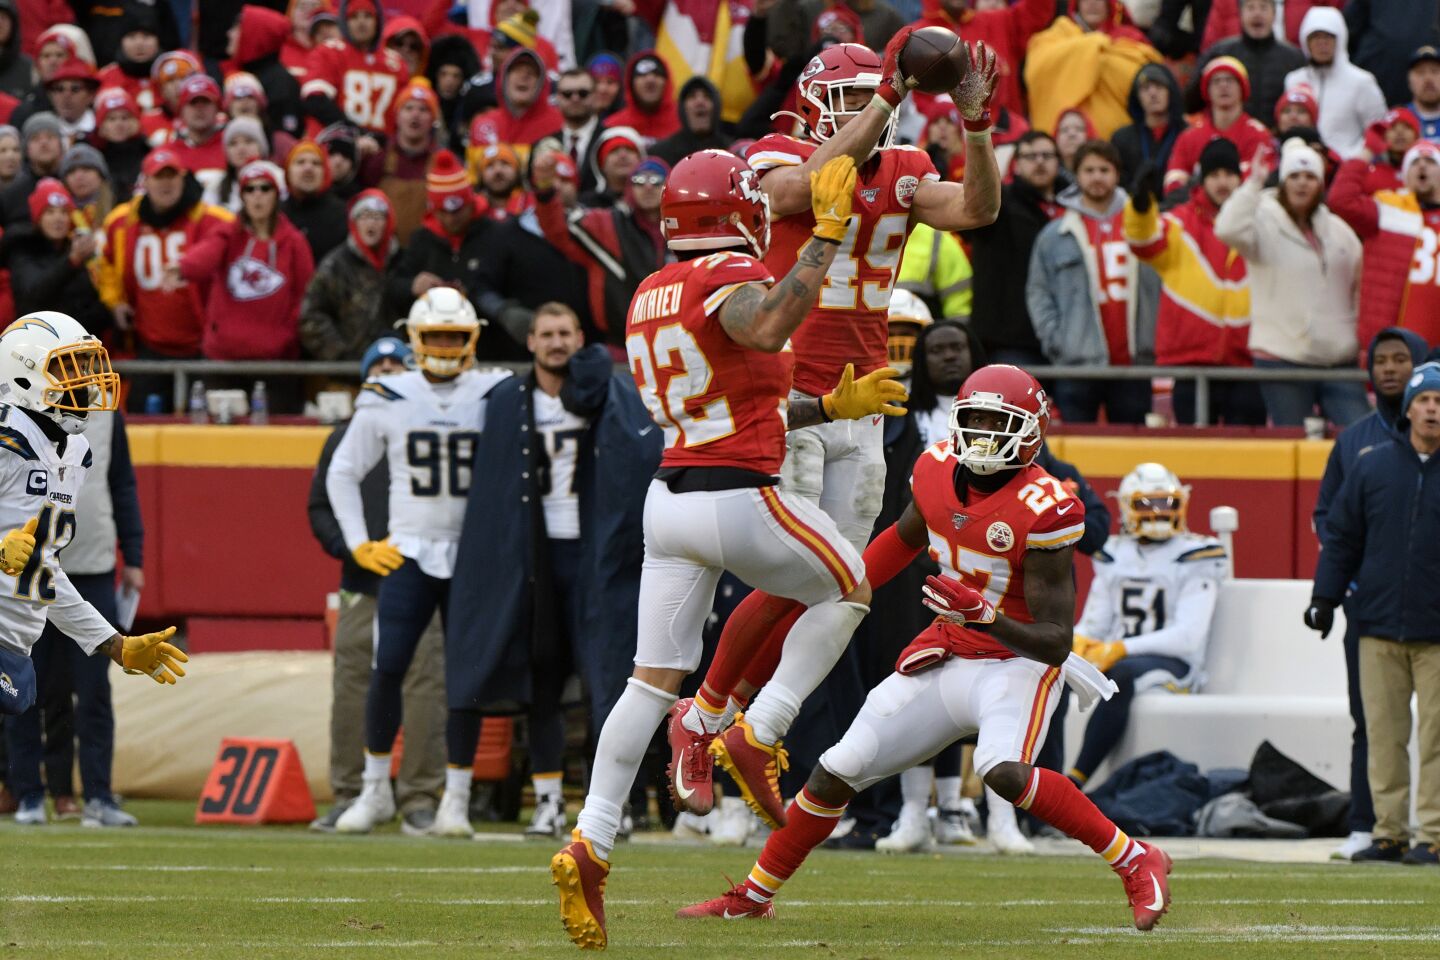 Chiefs safety Daniel Sorensen (49) intercepts a pass intended for Chargers receiver Keenan Allen during a game Sunday.